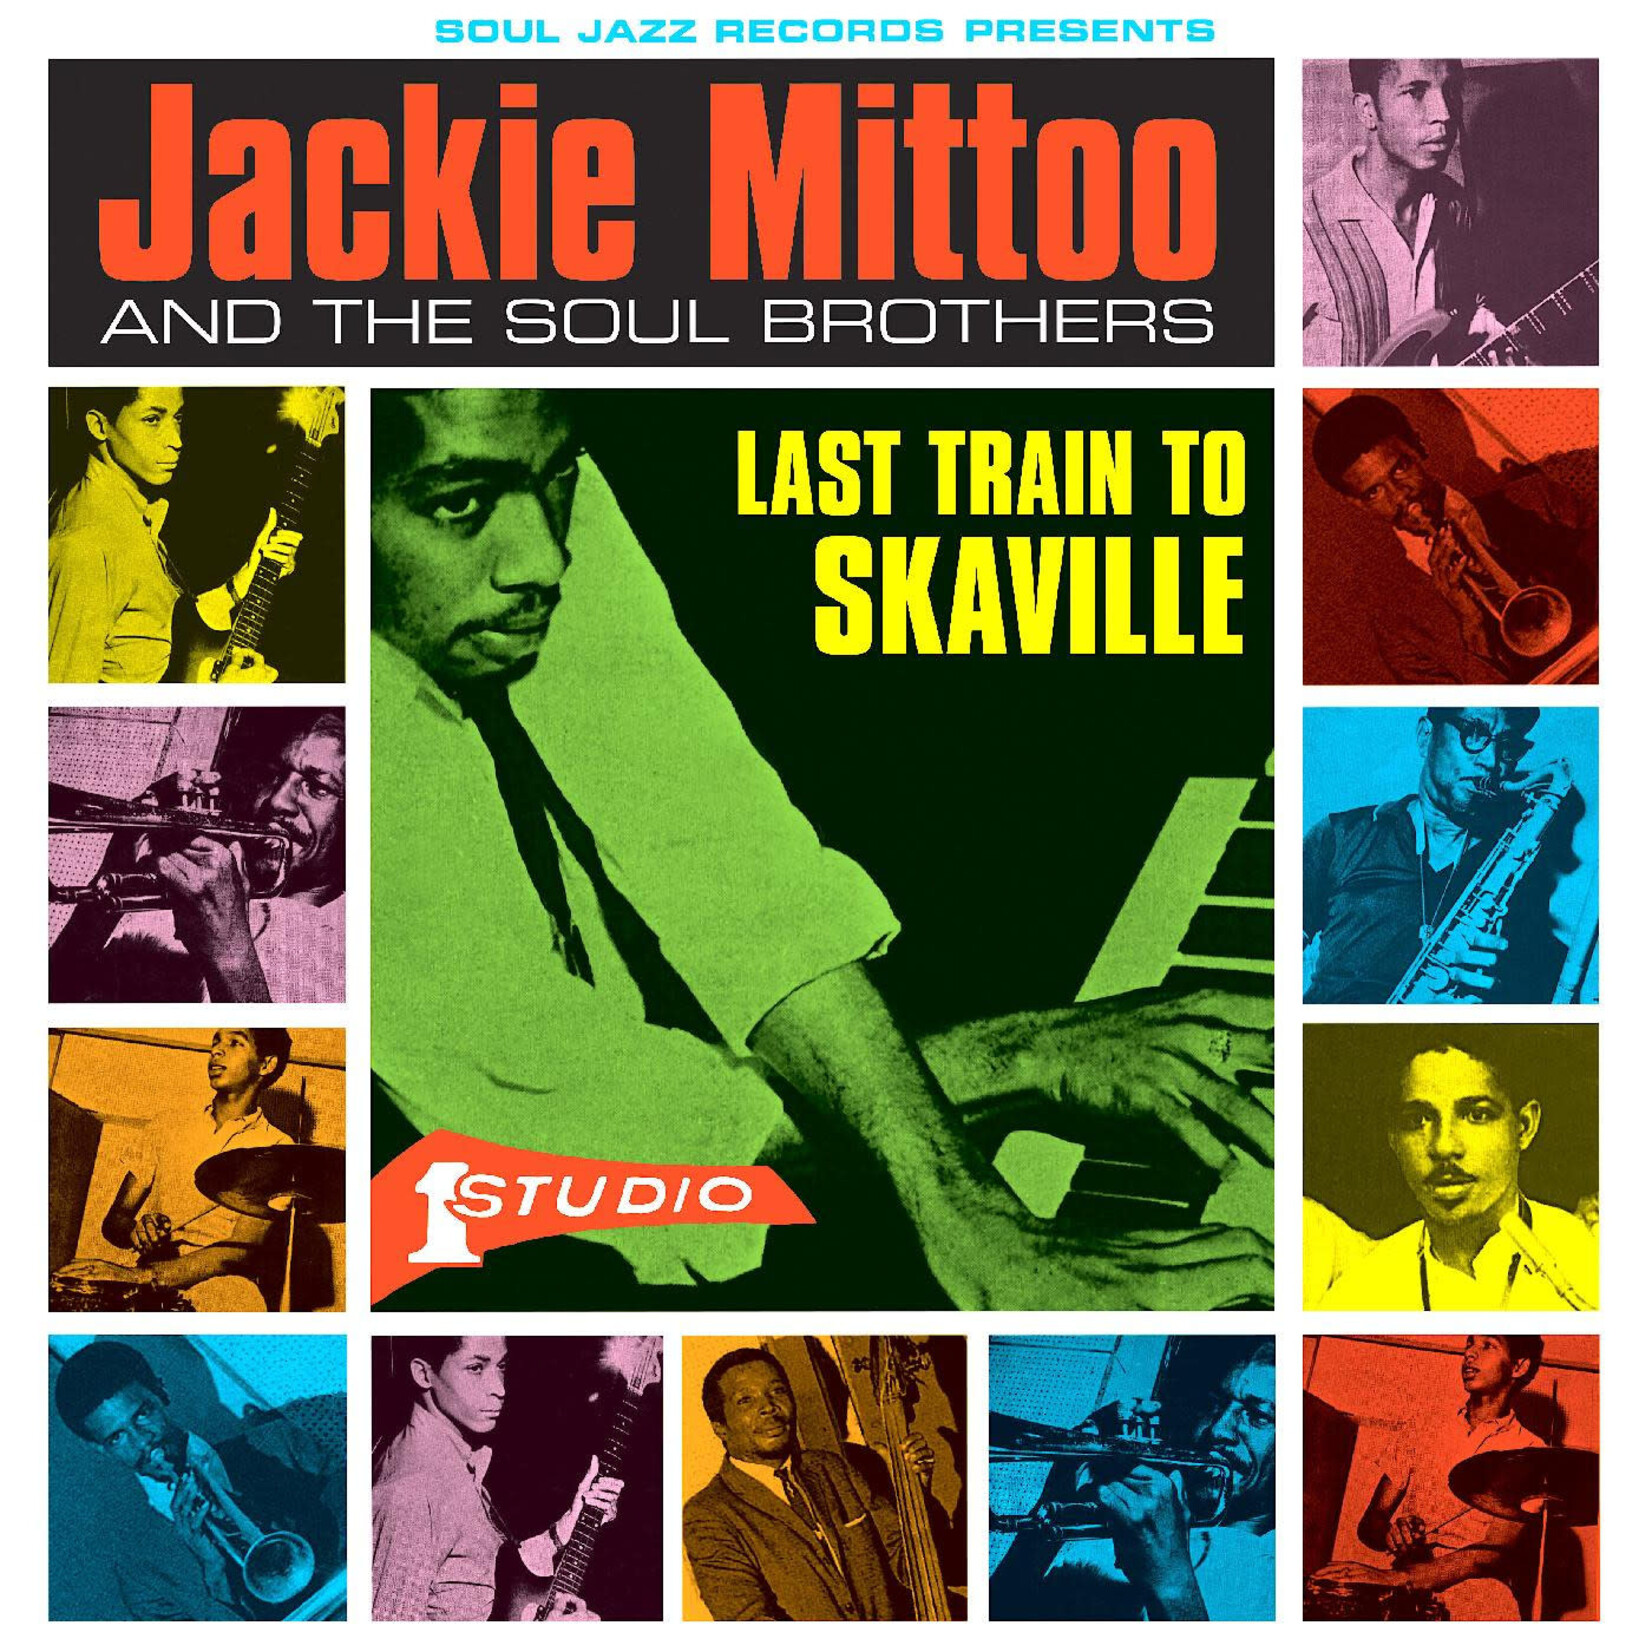 Jackie Mitoo And The Soul Brothers - Last Train To Skaville (Trans. Green) - SOJR80C - Vinyl LP (NEW)